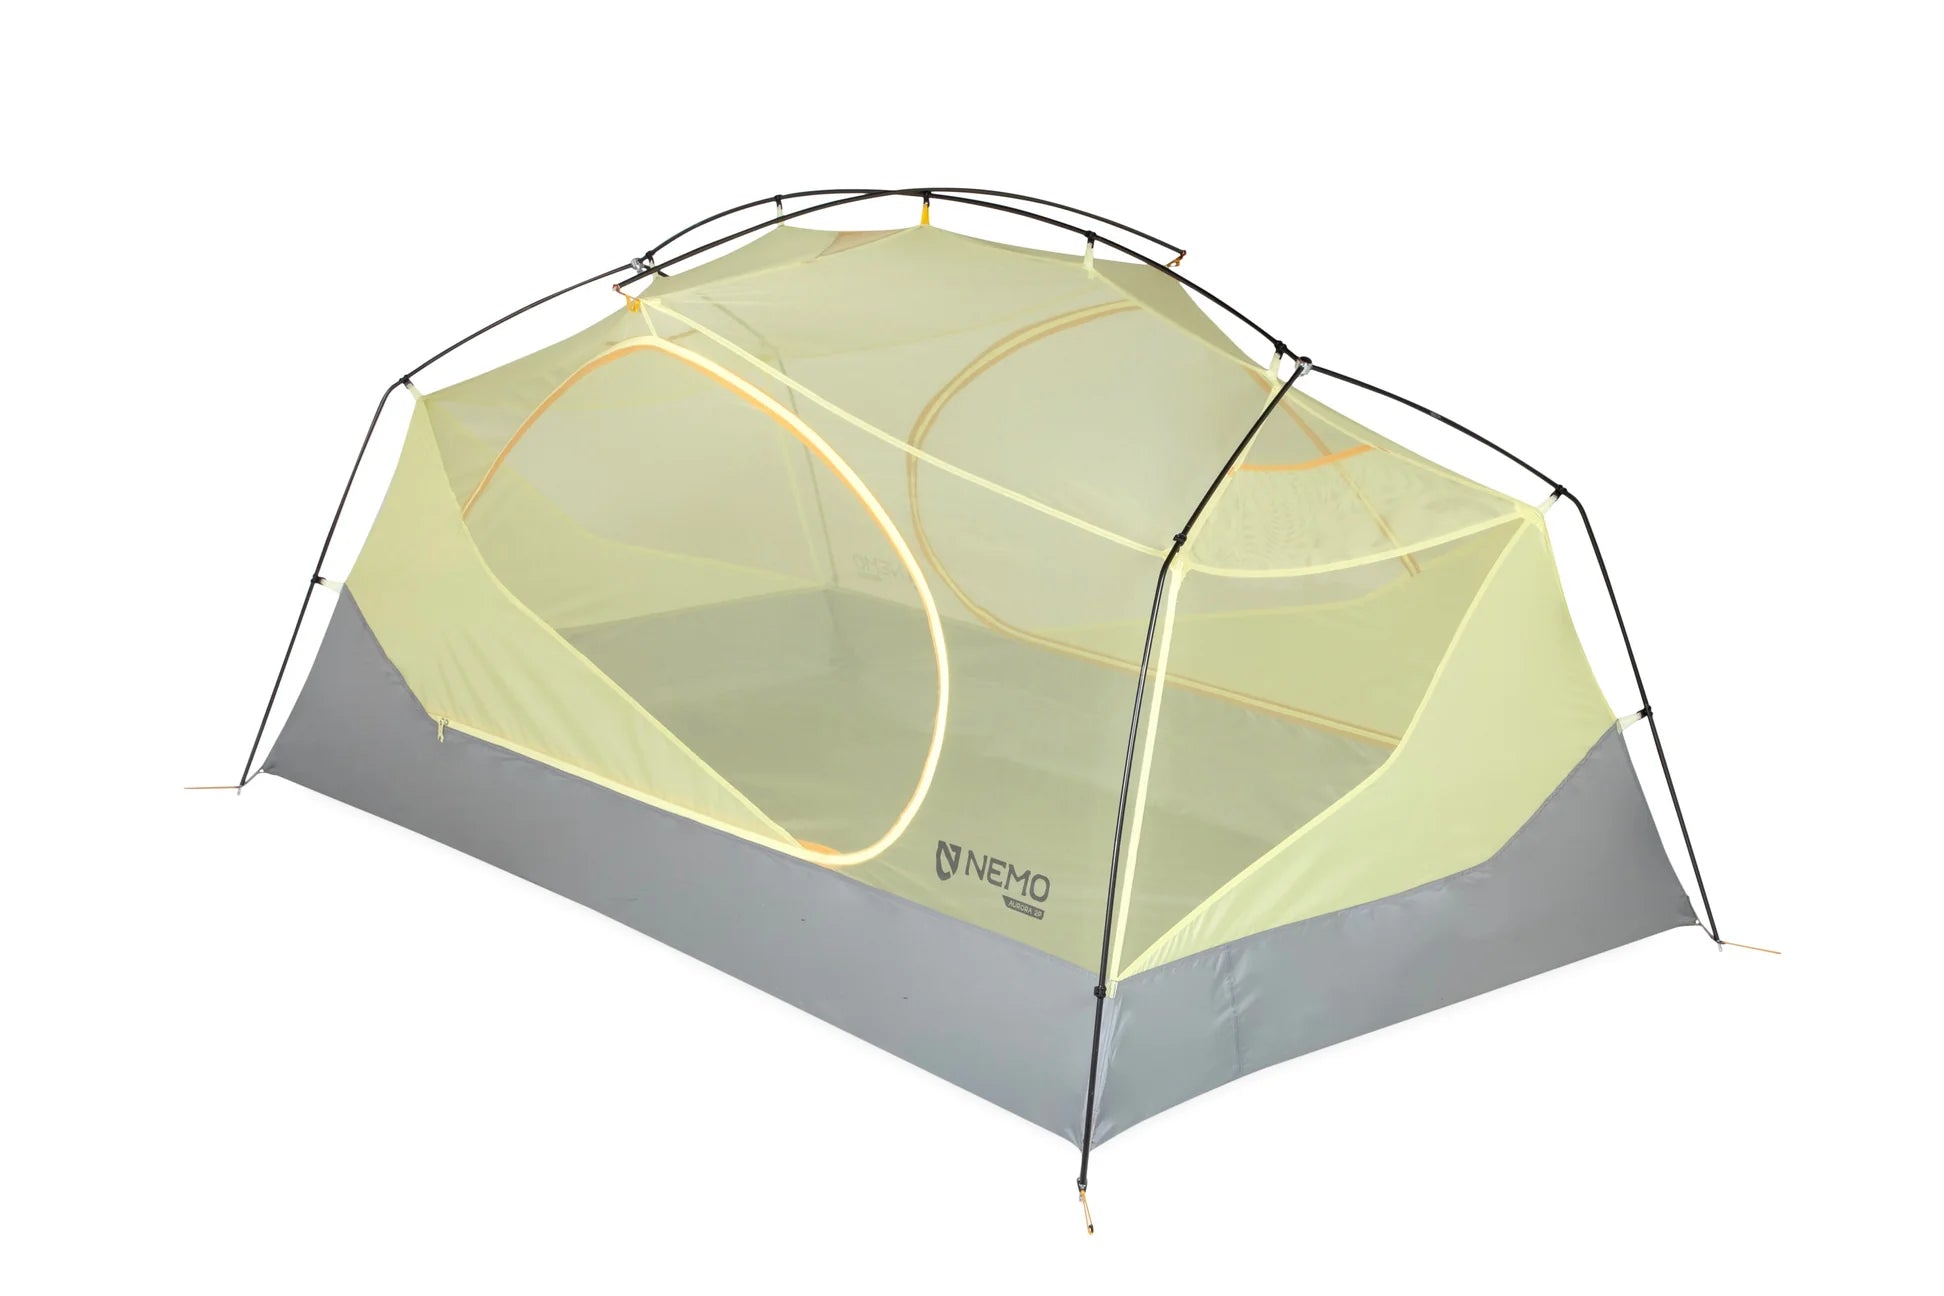 NEMO Aurora Backpacking Tent & Footprint 2 Person